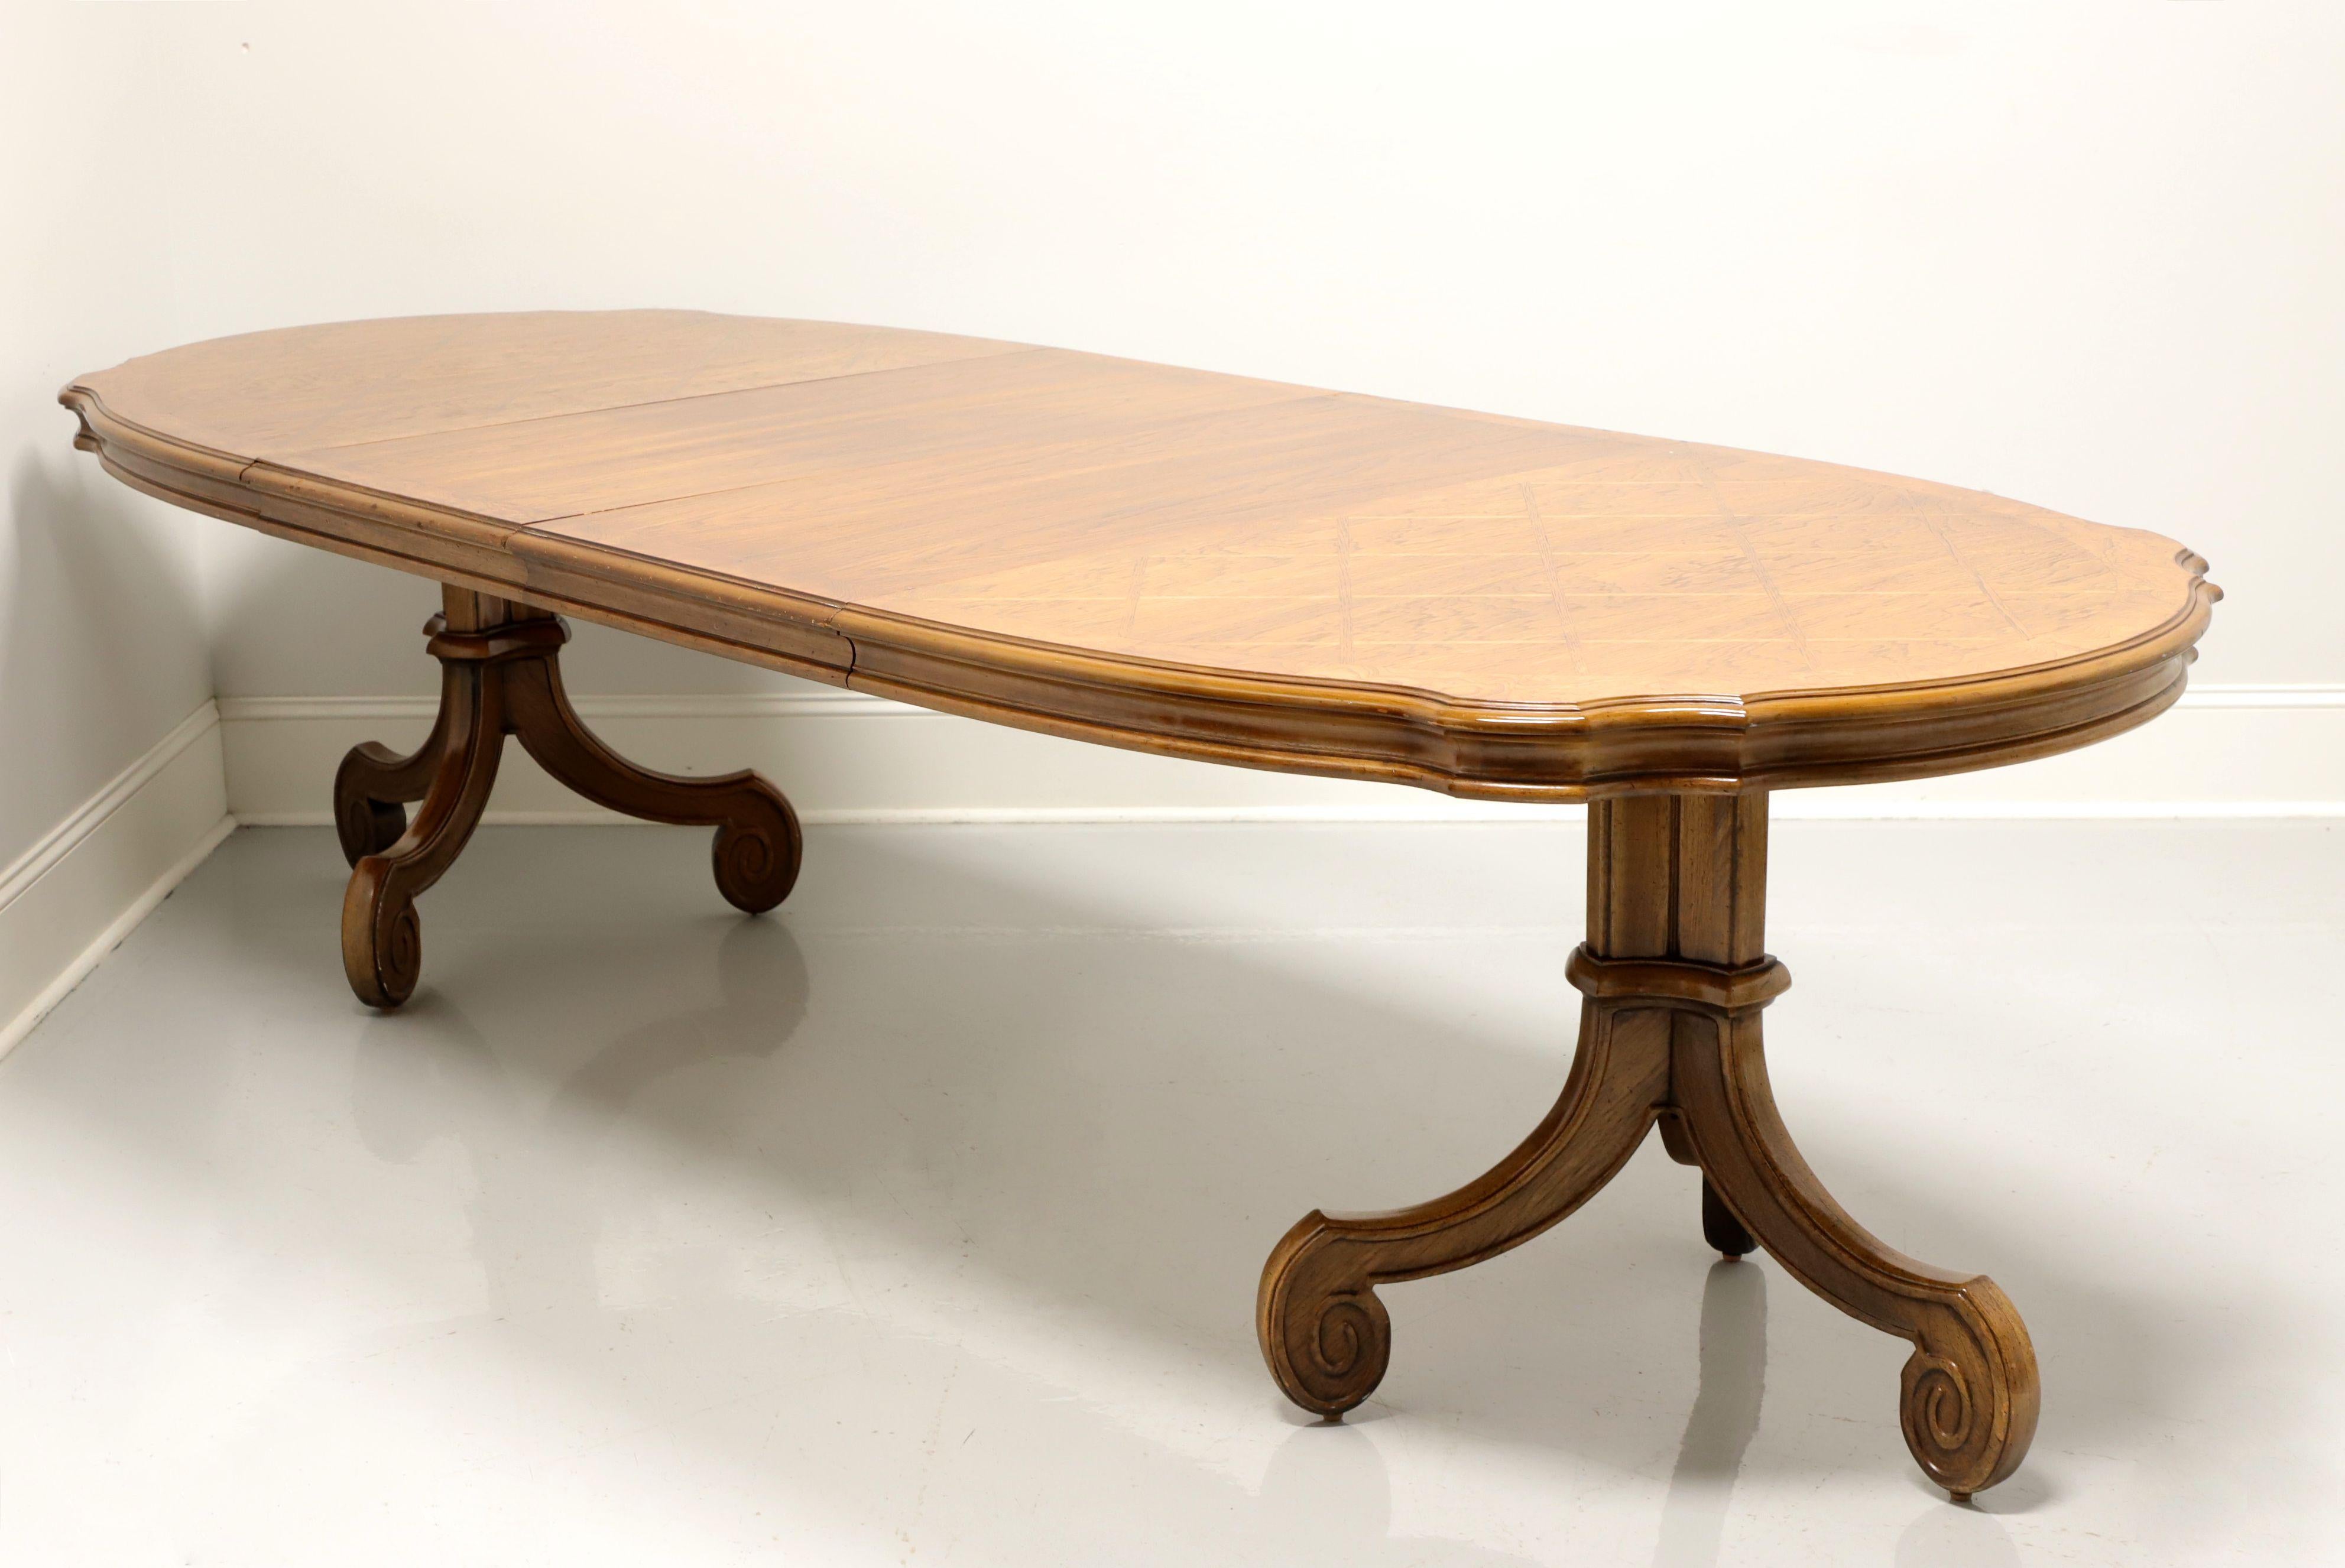 North American THOMASVILLE Ceremony Collection Mediterranean Walnut Dining Table